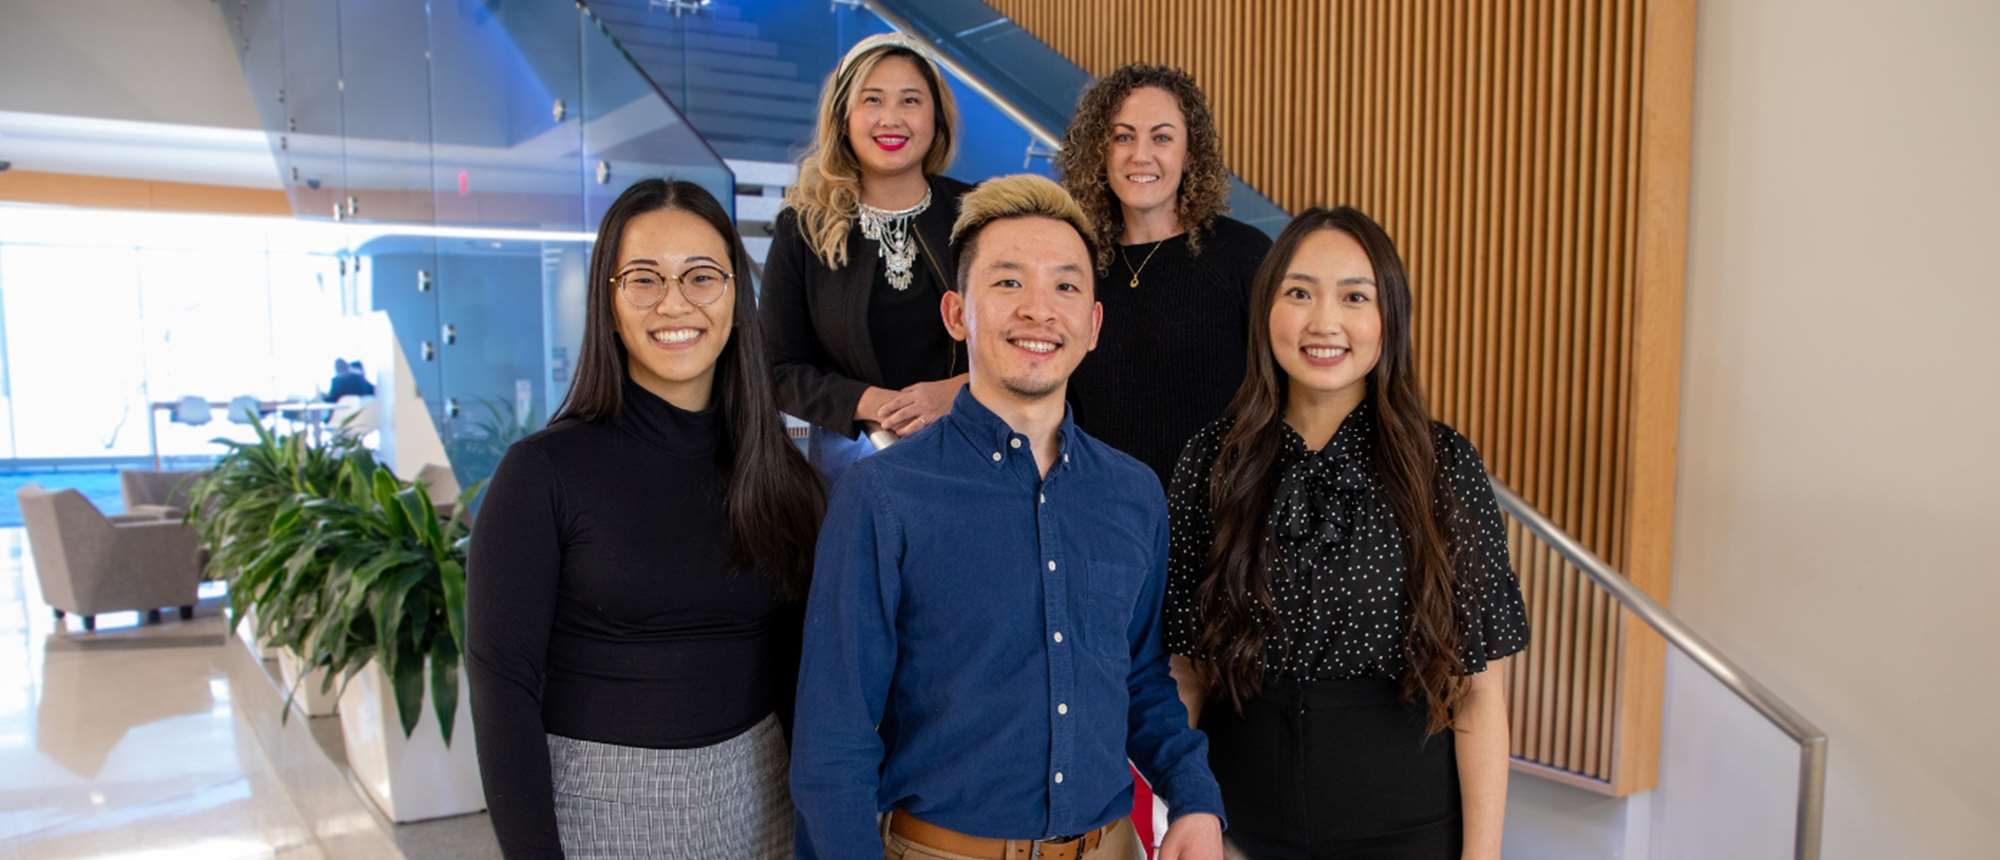 Student-led HAAPIE Initiative educates health care professionals on cultural intelligence, improved care for diverse populations